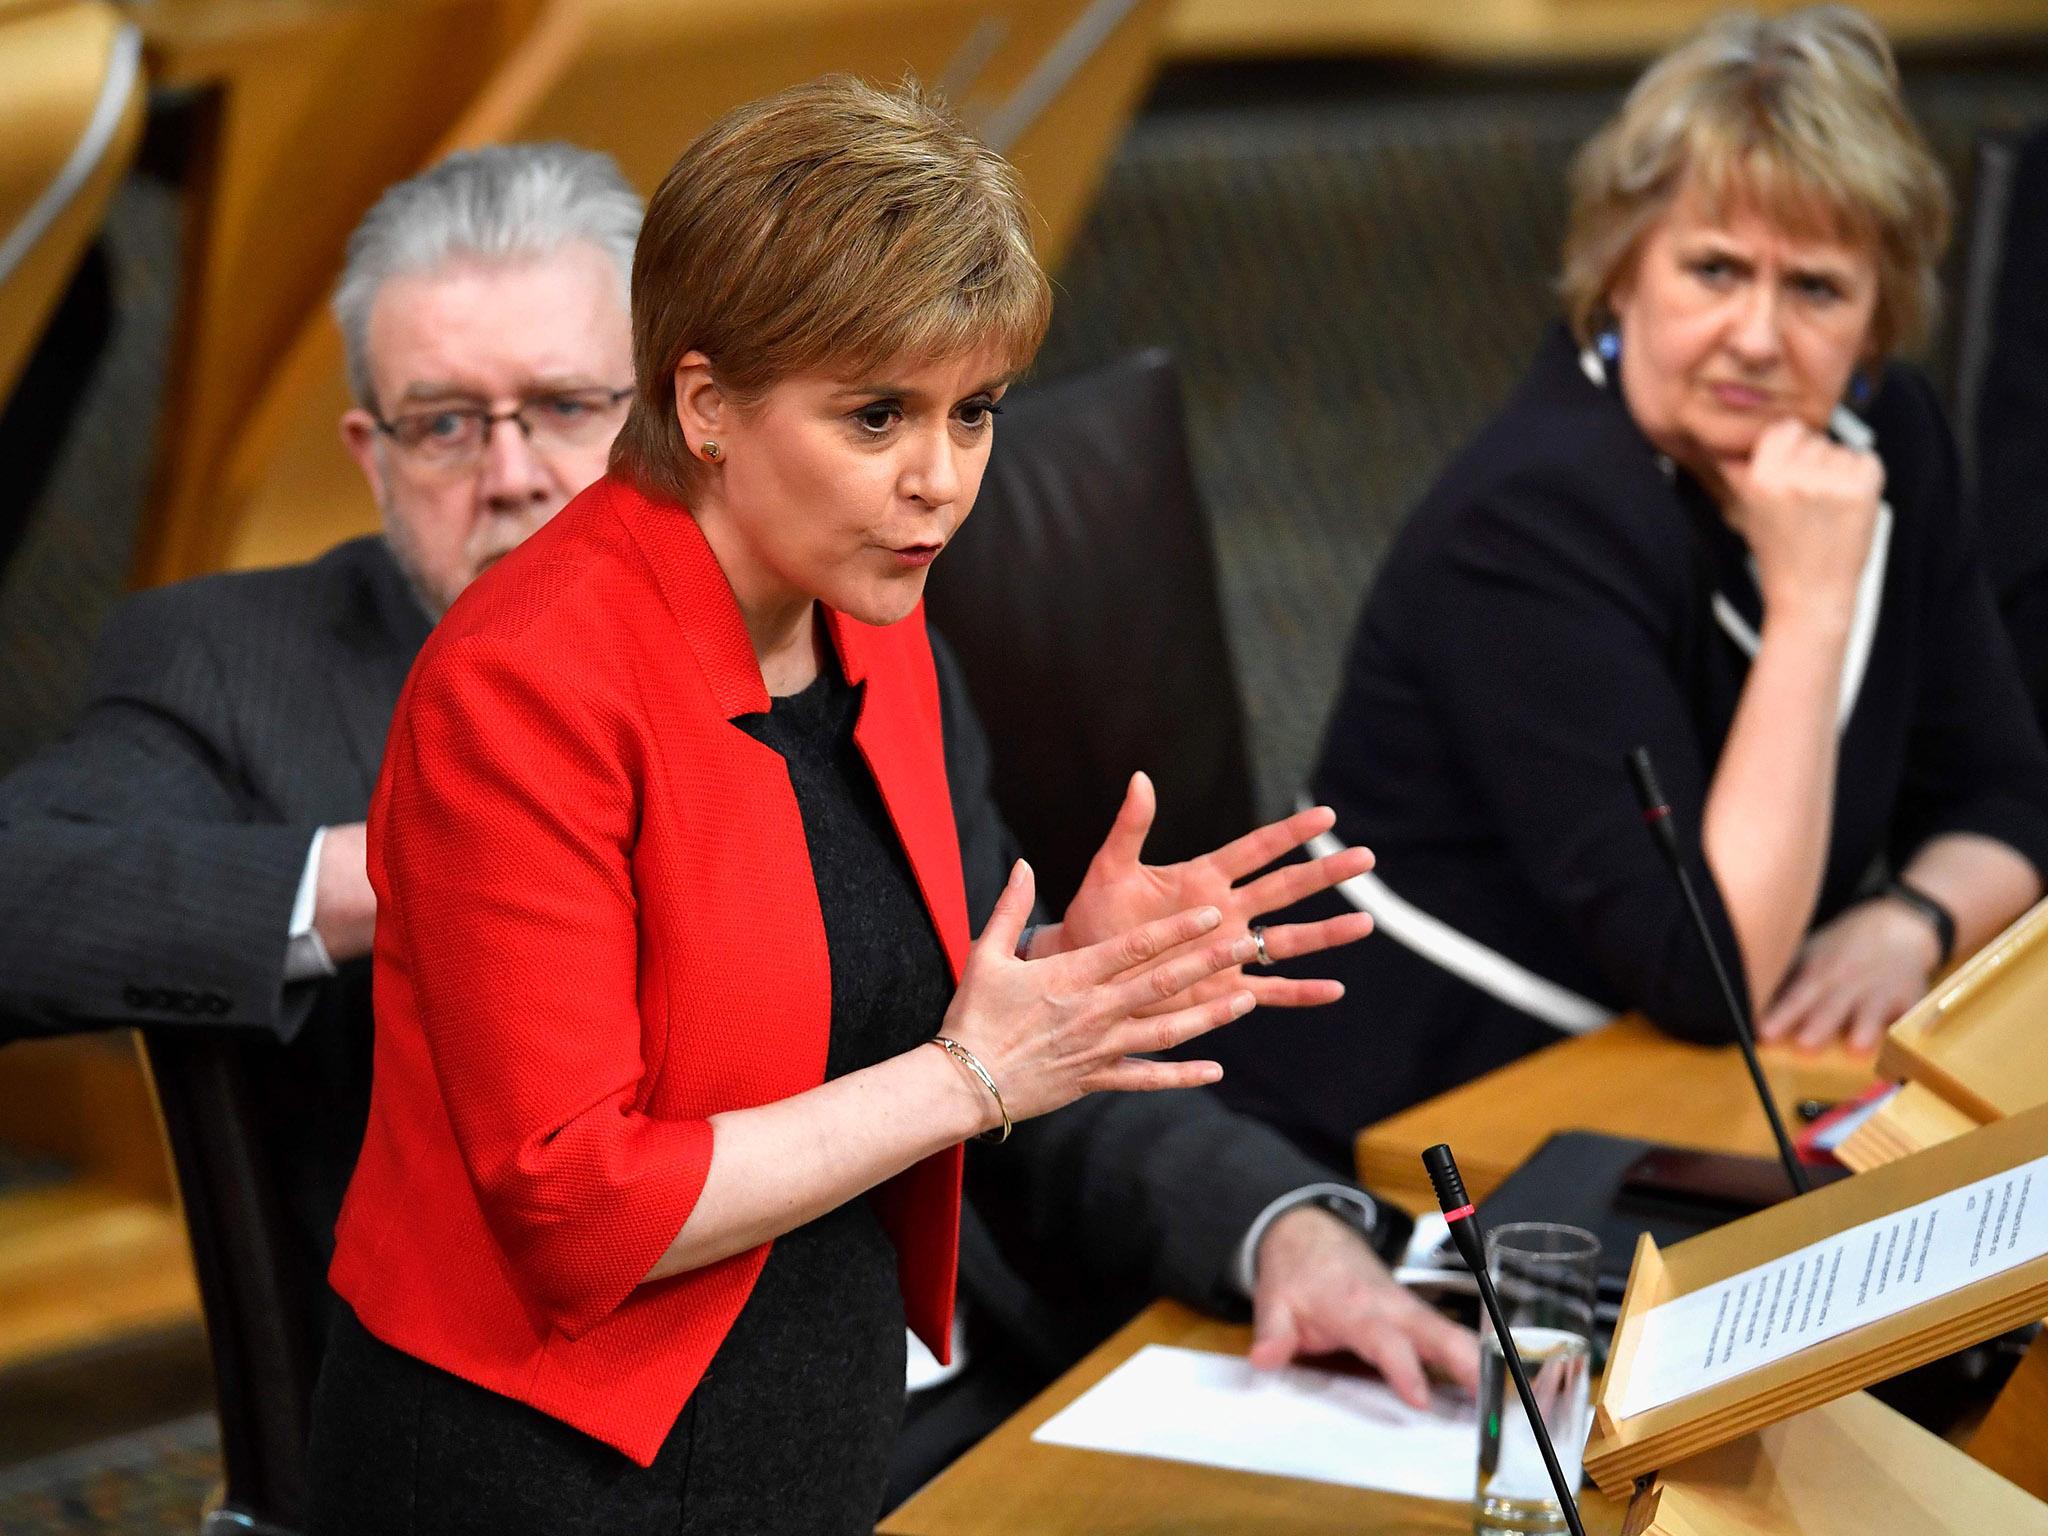 The Scottish Government will seek to hold a second referendum on independence from the United Kingdom